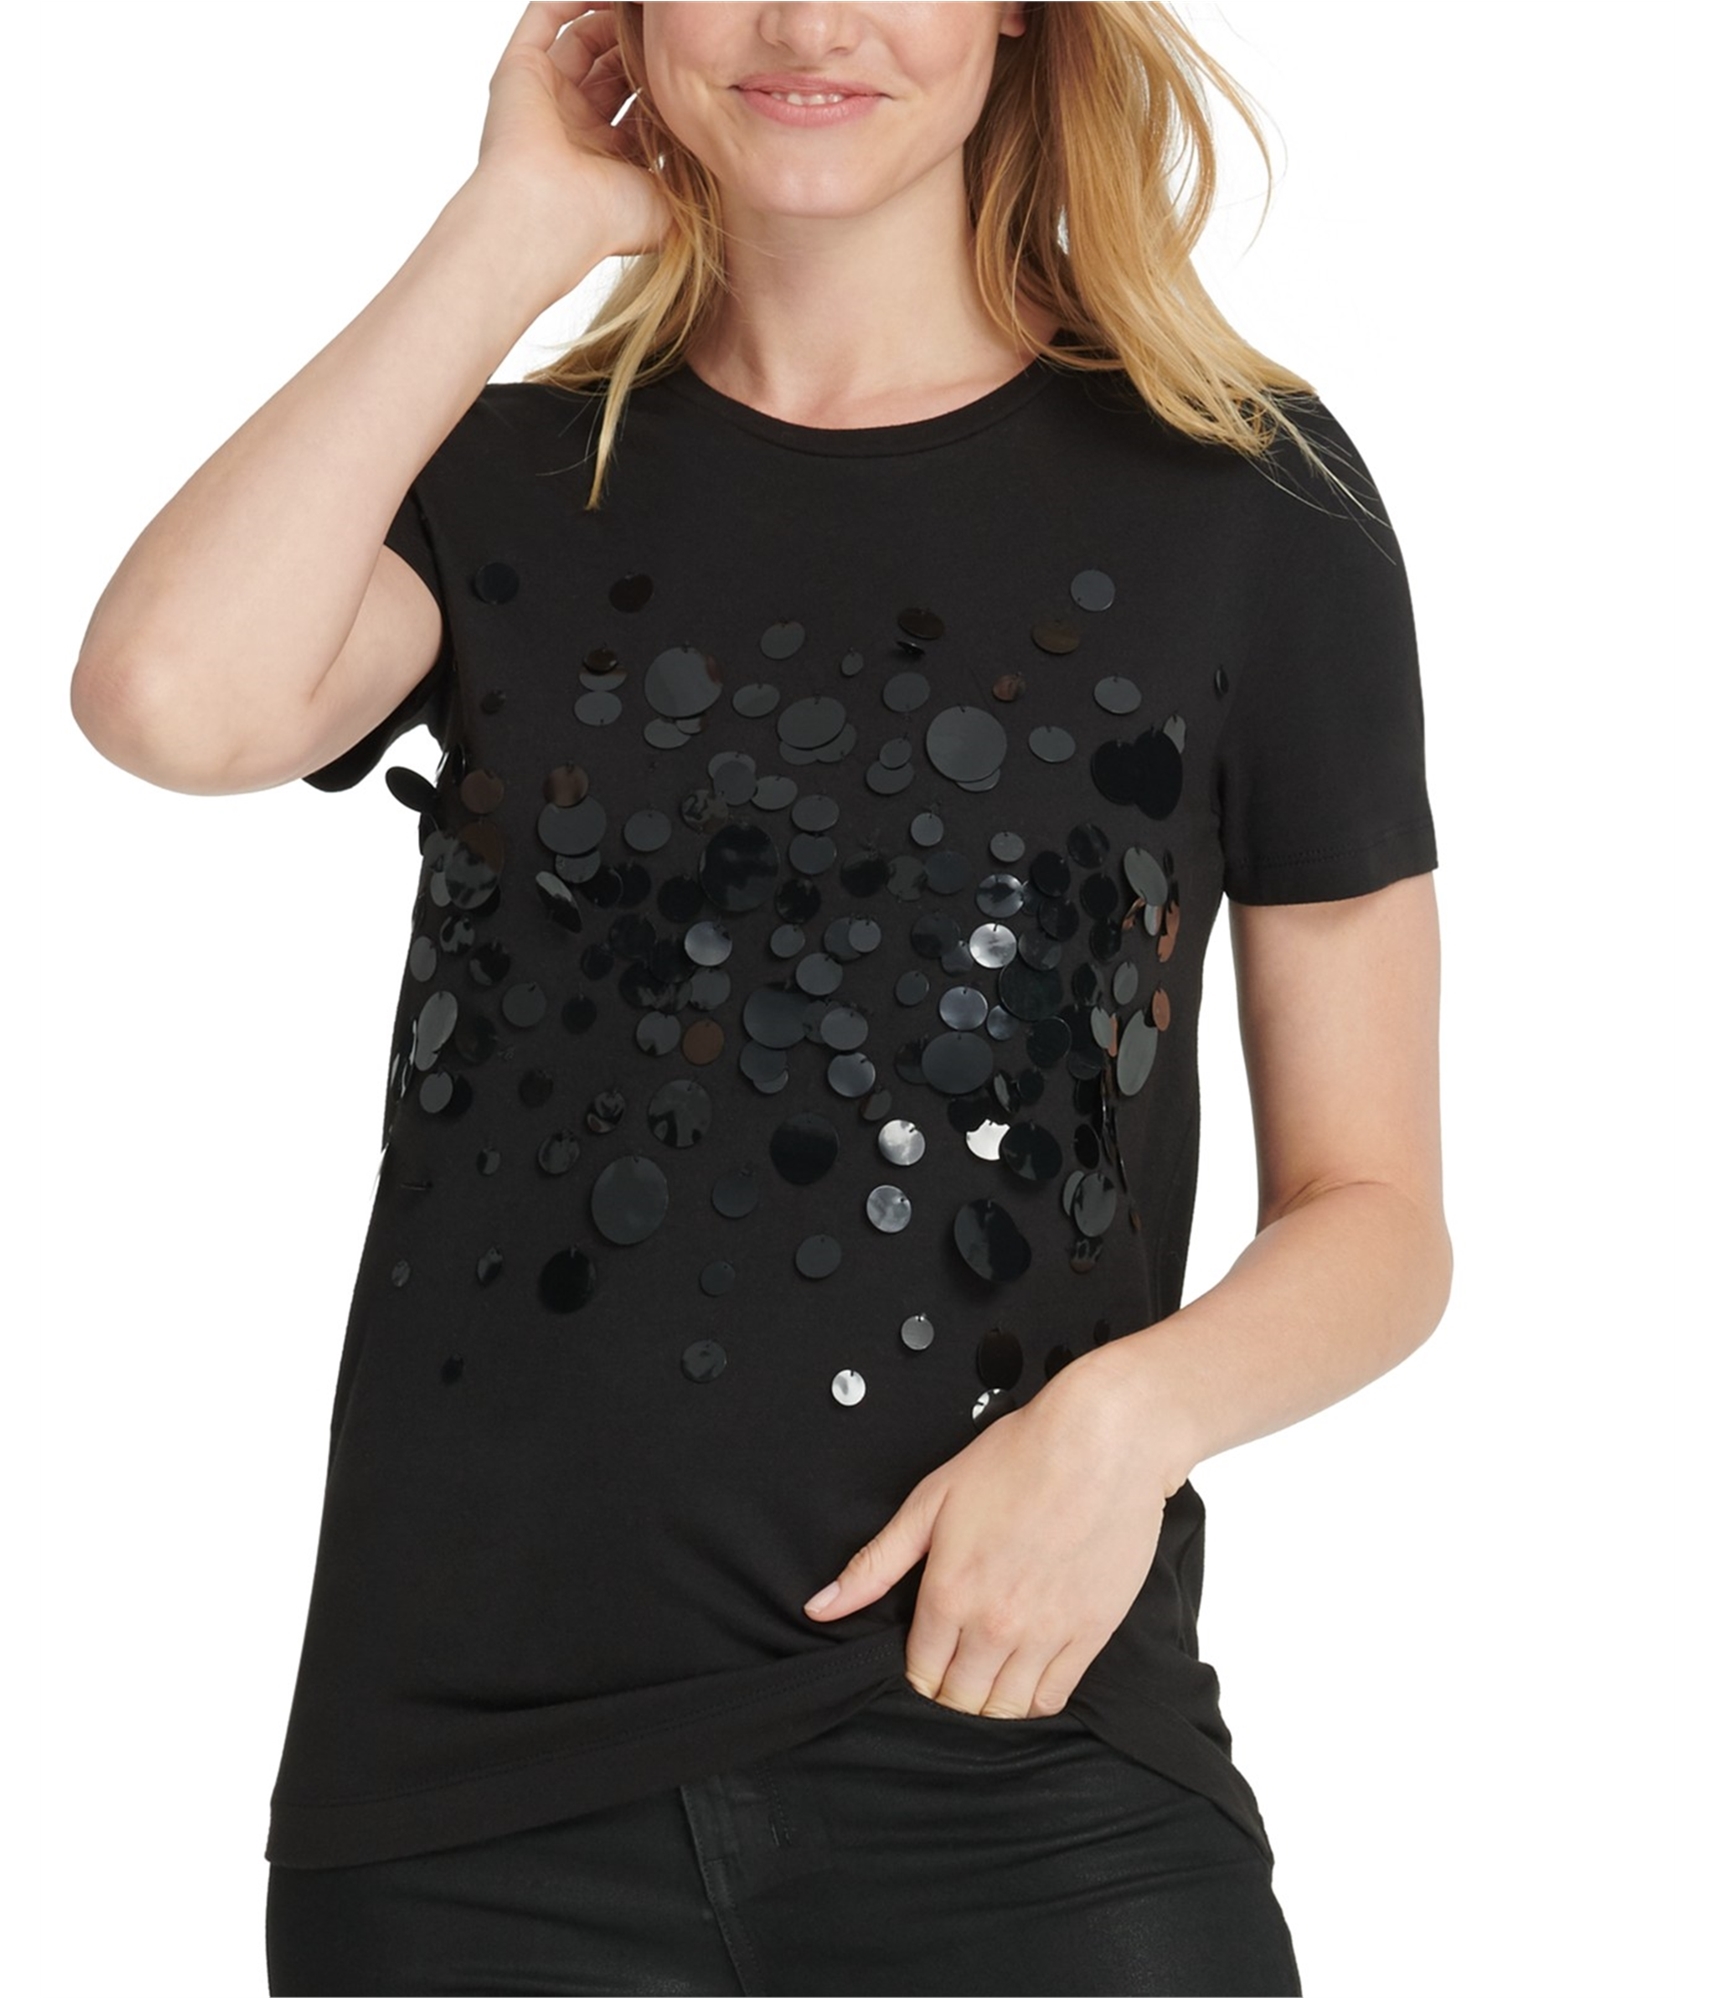 Buy a Dkny Womens Sequin Embellished T-Shirt, TW5